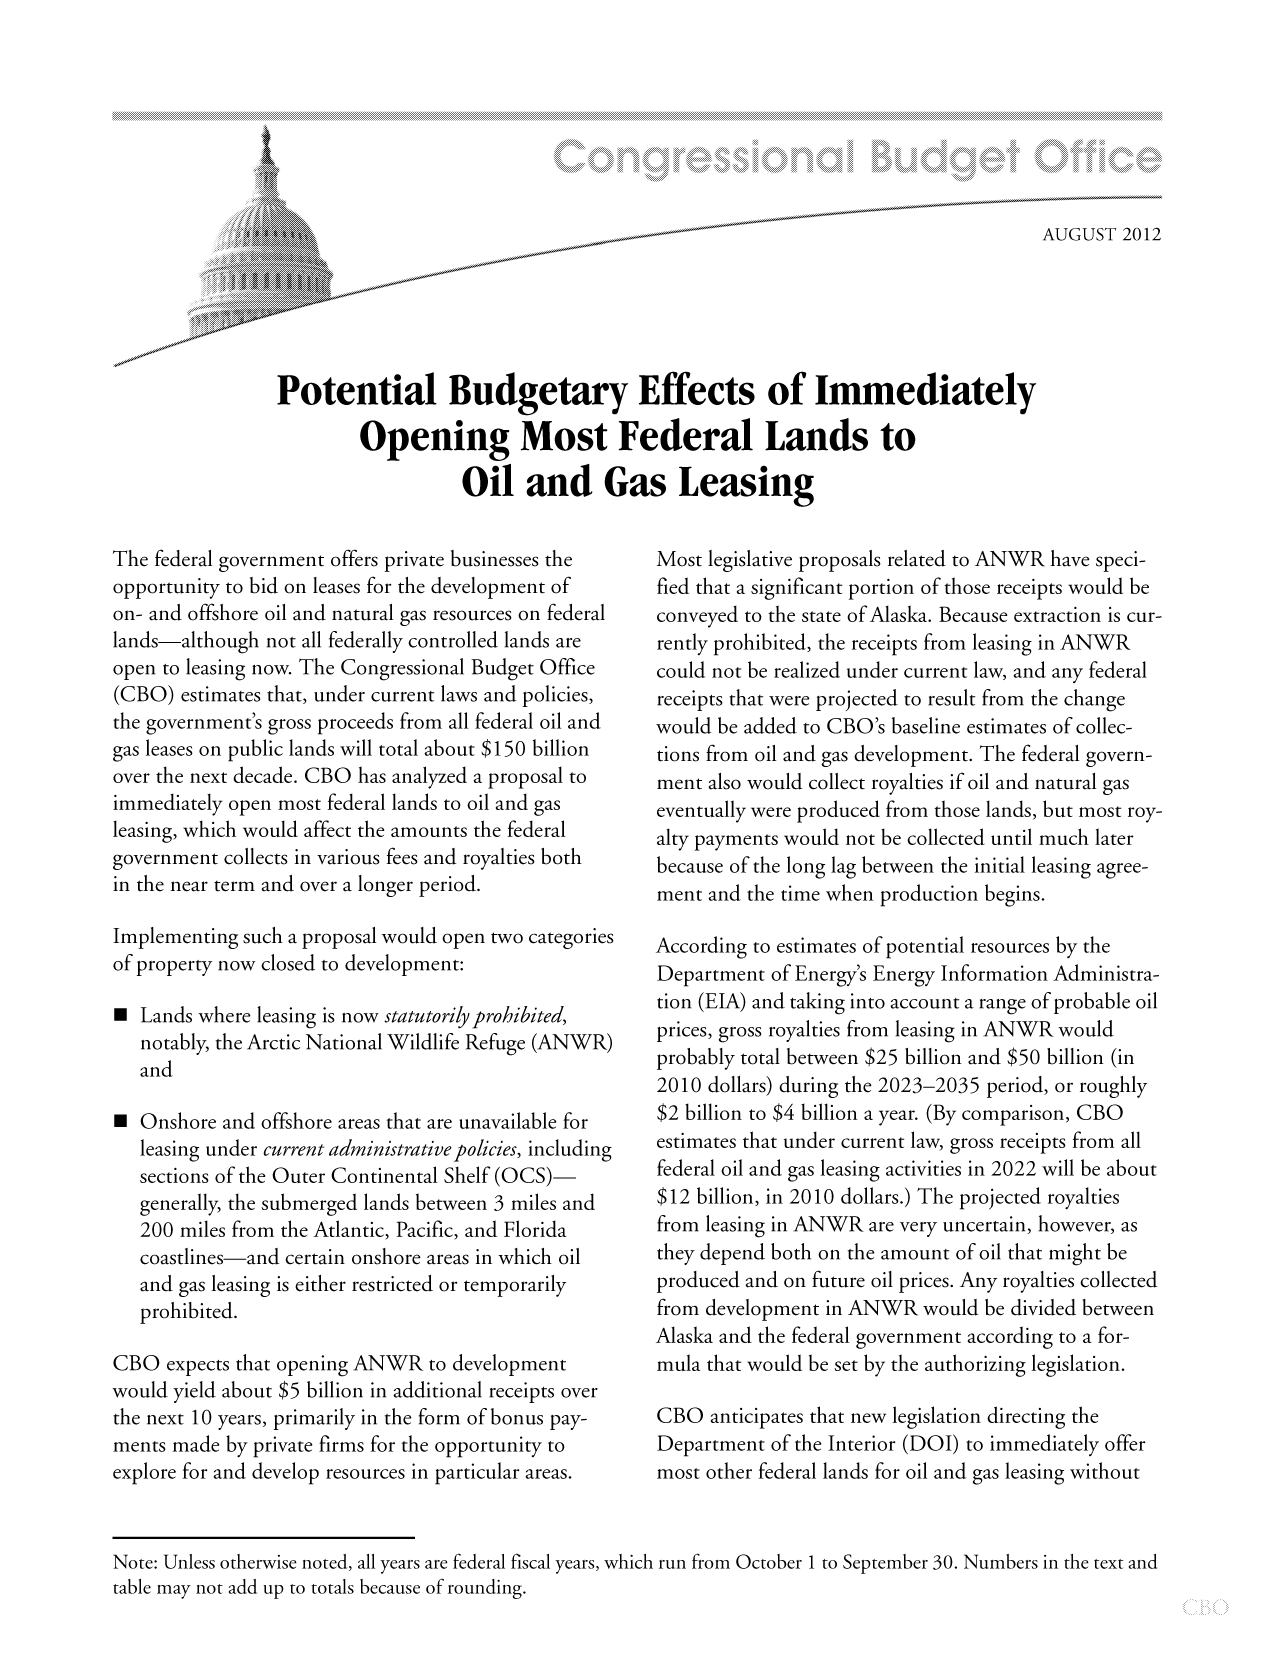 handle is hein.congrec/cbo10836 and id is 1 raw text is: AUGUST 2012
Potential Budgetary Effects of Immediately
Opening Most Federal Lands to
Oil and Gas Leasing

The federal government offers private businesses the
opportunity to bid on leases for the development of
on- and offshore oil and natural gas resources on federal
lands-although not all federally controlled lands are
open to leasing now. The Congressional Budget Office
(CBO) estimates that, under current laws and policies,
the government's gross proceeds from all federal oil and
gas leases on public lands will total about $150 billion
over the next decade. CBO has analyzed a proposal to
immediately open most federal lands to oil and gas
leasing, which would affect the amounts the federal
government collects in various fees and royalties both
in the near term and over a longer period.
Implementing such a proposal would open two categories
of property now closed to development:
m Lands where leasing is now statutorily prohibited,
notably, the Arctic National Wildlife Refuge (ANWR)
and
m Onshore and offshore areas that are unavailable for
leasing under current administrative policies, including
sections of the Outer Continental Shelf (OCS)-
generally, the submerged lands between 3 miles and
200 miles from the Atlantic, Pacific, and Florida
coastlines-and certain onshore areas in which oil
and gas leasing is either restricted or temporarily
prohibited.
CBO expects that opening ANWR to development
would yield about $5 billion in additional receipts over
the next 10 years, primarily in the form of bonus pay-
ments made by private firms for the opportunity to
explore for and develop resources in particular areas.

Most legislative proposals related to ANWR have speci-
fied that a significant portion of those receipts would be
conveyed to the state of Alaska. Because extraction is cur-
rently prohibited, the receipts from leasing in ANWR
could not be realized under current law, and any federal
receipts that were projected to result from the change
would be added to CBO's baseline estimates of collec-
tions from oil and gas development. The federal govern-
ment also would collect royalties if oil and natural gas
eventually were produced from those lands, but most roy-
alty payments would not be collected until much later
because of the long lag between the initial leasing agree-
ment and the time when production begins.
According to estimates of potential resources by the
Department of Energy's Energy Information Administra-
tion (EIA) and taking into account a range of probable oil
prices, gross royalties from leasing in ANWR would
probably total between $25 billion and $50 billion (in
2010 dollars) during the 2023-2035 period, or roughly
$2 billion to $4 billion a year. (By comparison, CBO
estimates that under current law, gross receipts from all
federal oil and gas leasing activities in 2022 will be about
$12 billion, in 2010 dollars.) The projected royalties
from leasing in ANWR are very uncertain, however, as
they depend both on the amount of oil that might be
produced and on future oil prices. Any royalties collected
from development in ANWR would be divided between
Alaska and the federal government according to a for-
mula that would be set by the authorizing legislation.
CBO anticipates that new legislation directing the
Department of the Interior (DOI) to immediately offer
most other federal lands for oil and gas leasing without

Note: Unless otherwise noted, all years are federal fiscal years, which run from October 1 to September 30. Numbers in the text and
table may not add up to totals because of rounding.


